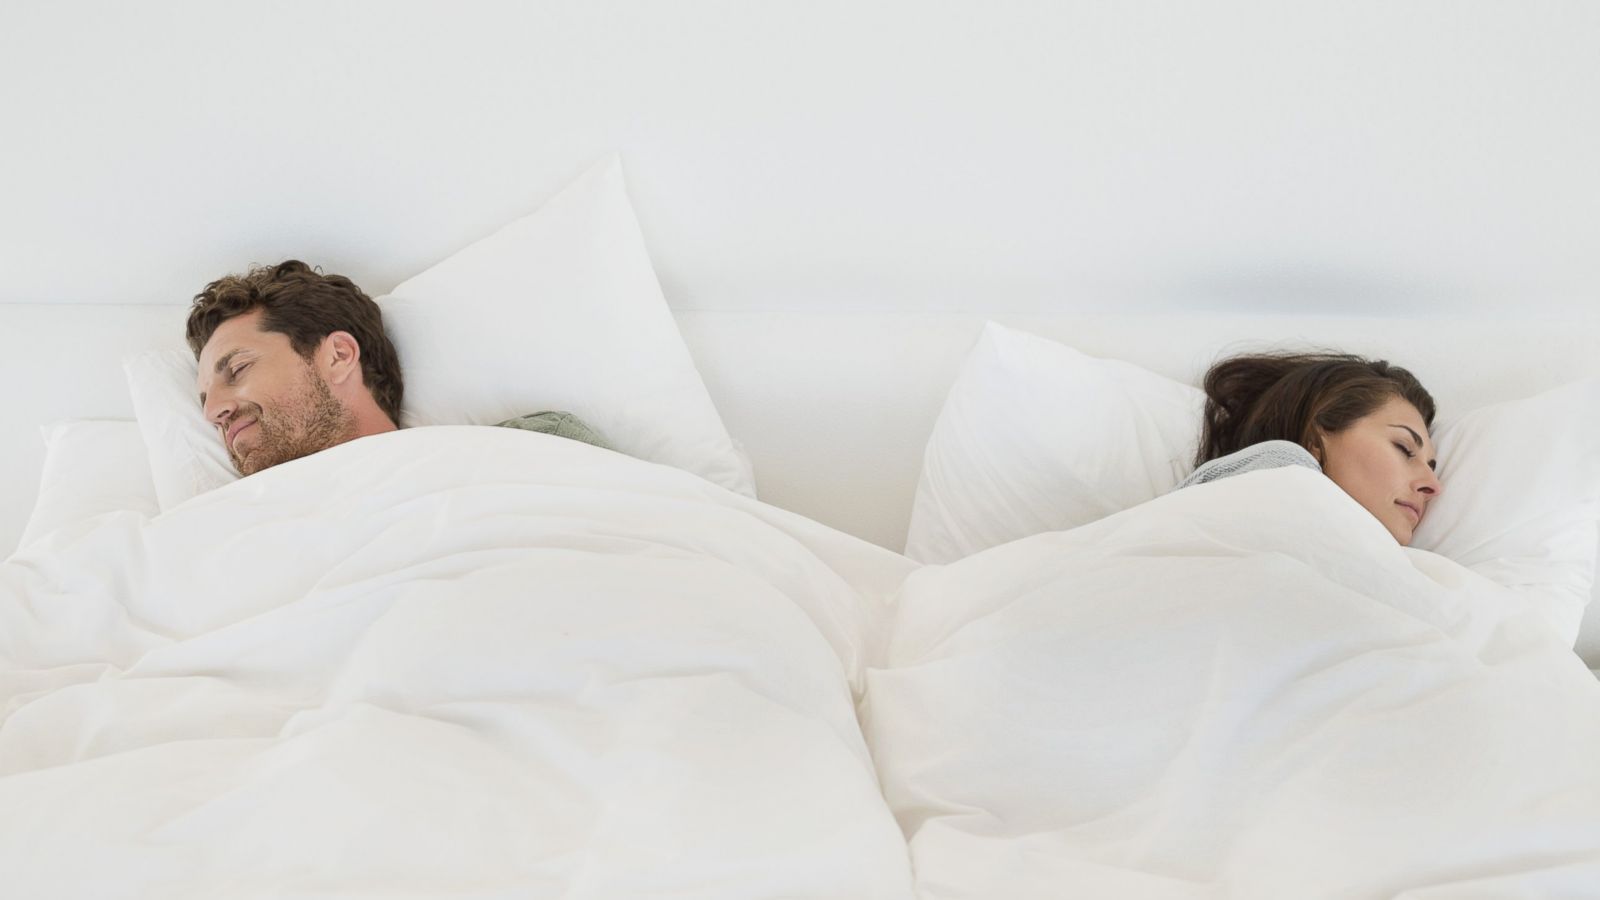 Can Sleeping Apart Help Your Relationship?